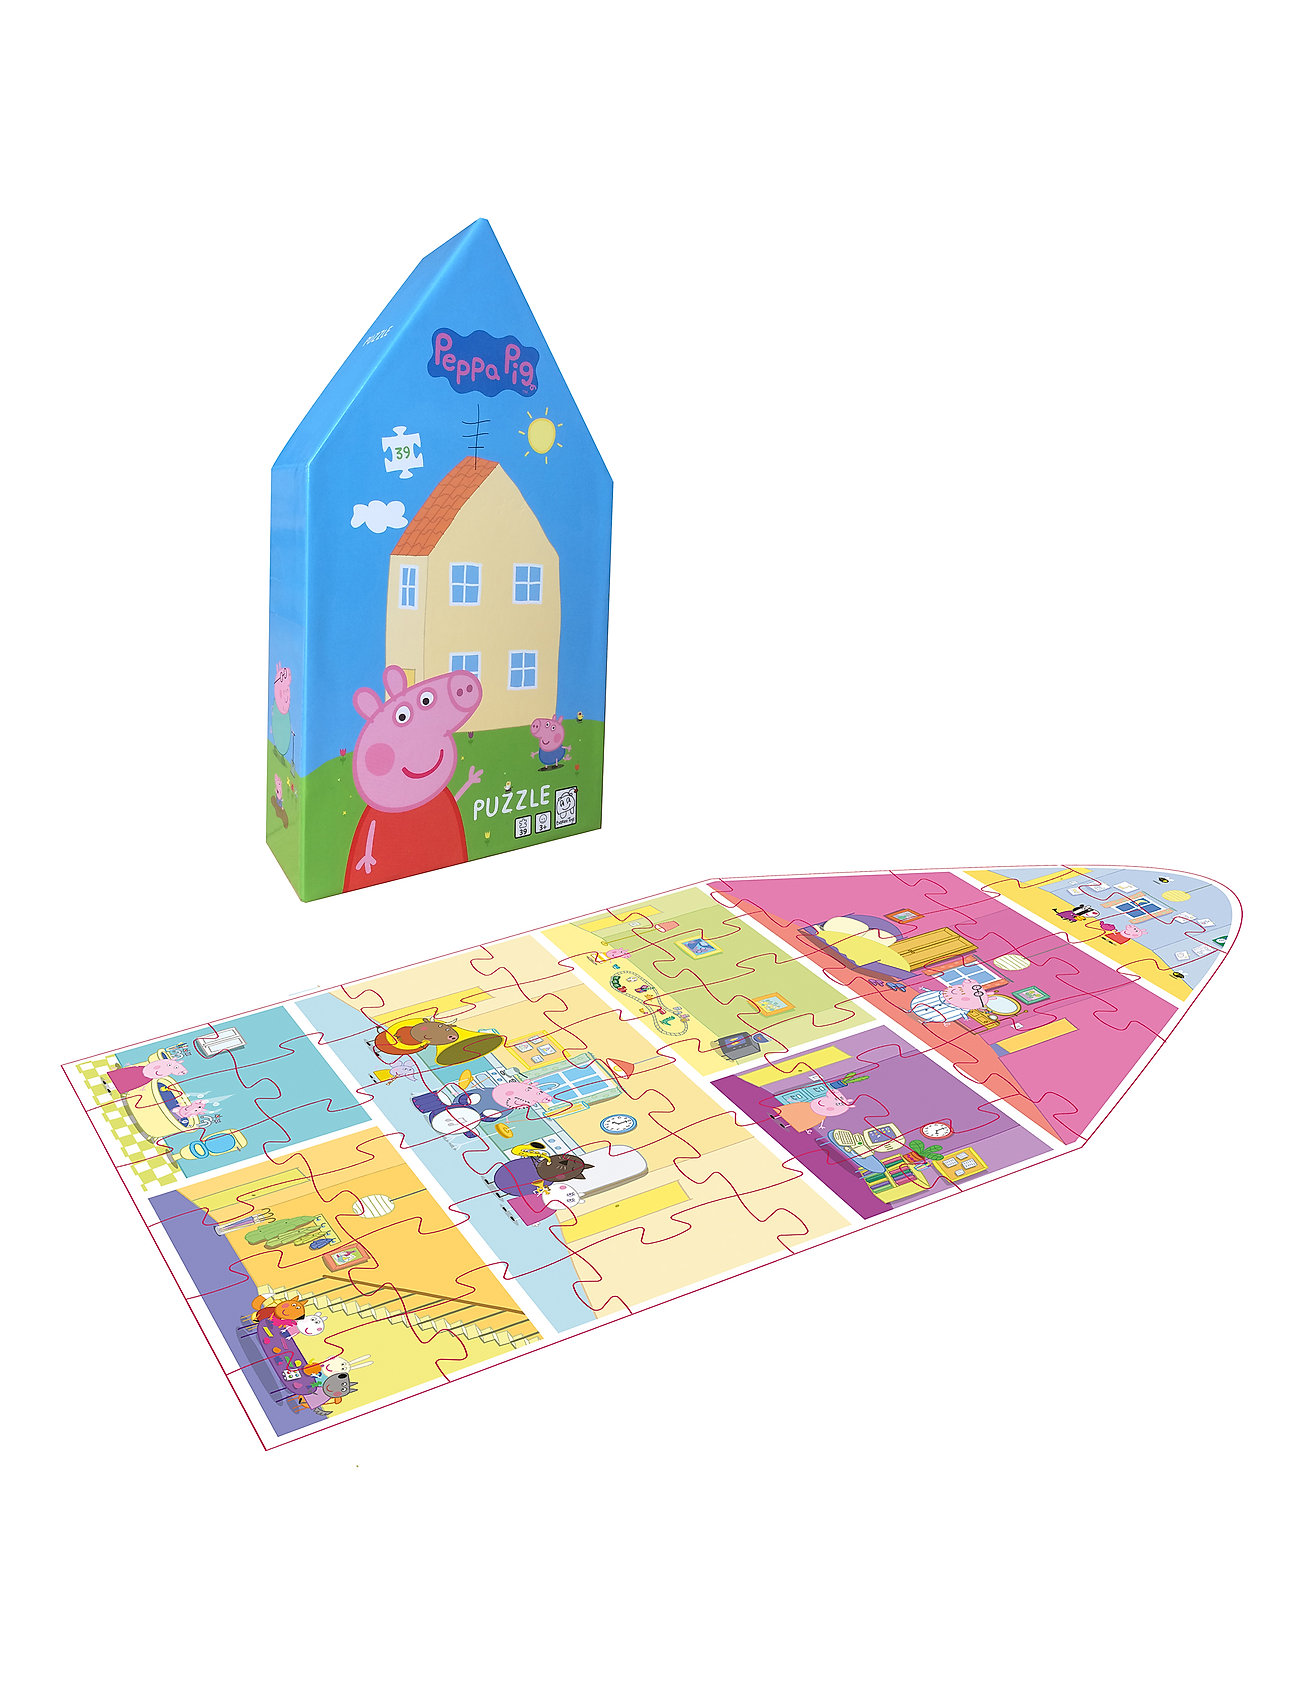 Peppa Pig Shaped Puzzle House Toys Puzzles And Games Puzzles Multi/patterned Gurli Gris